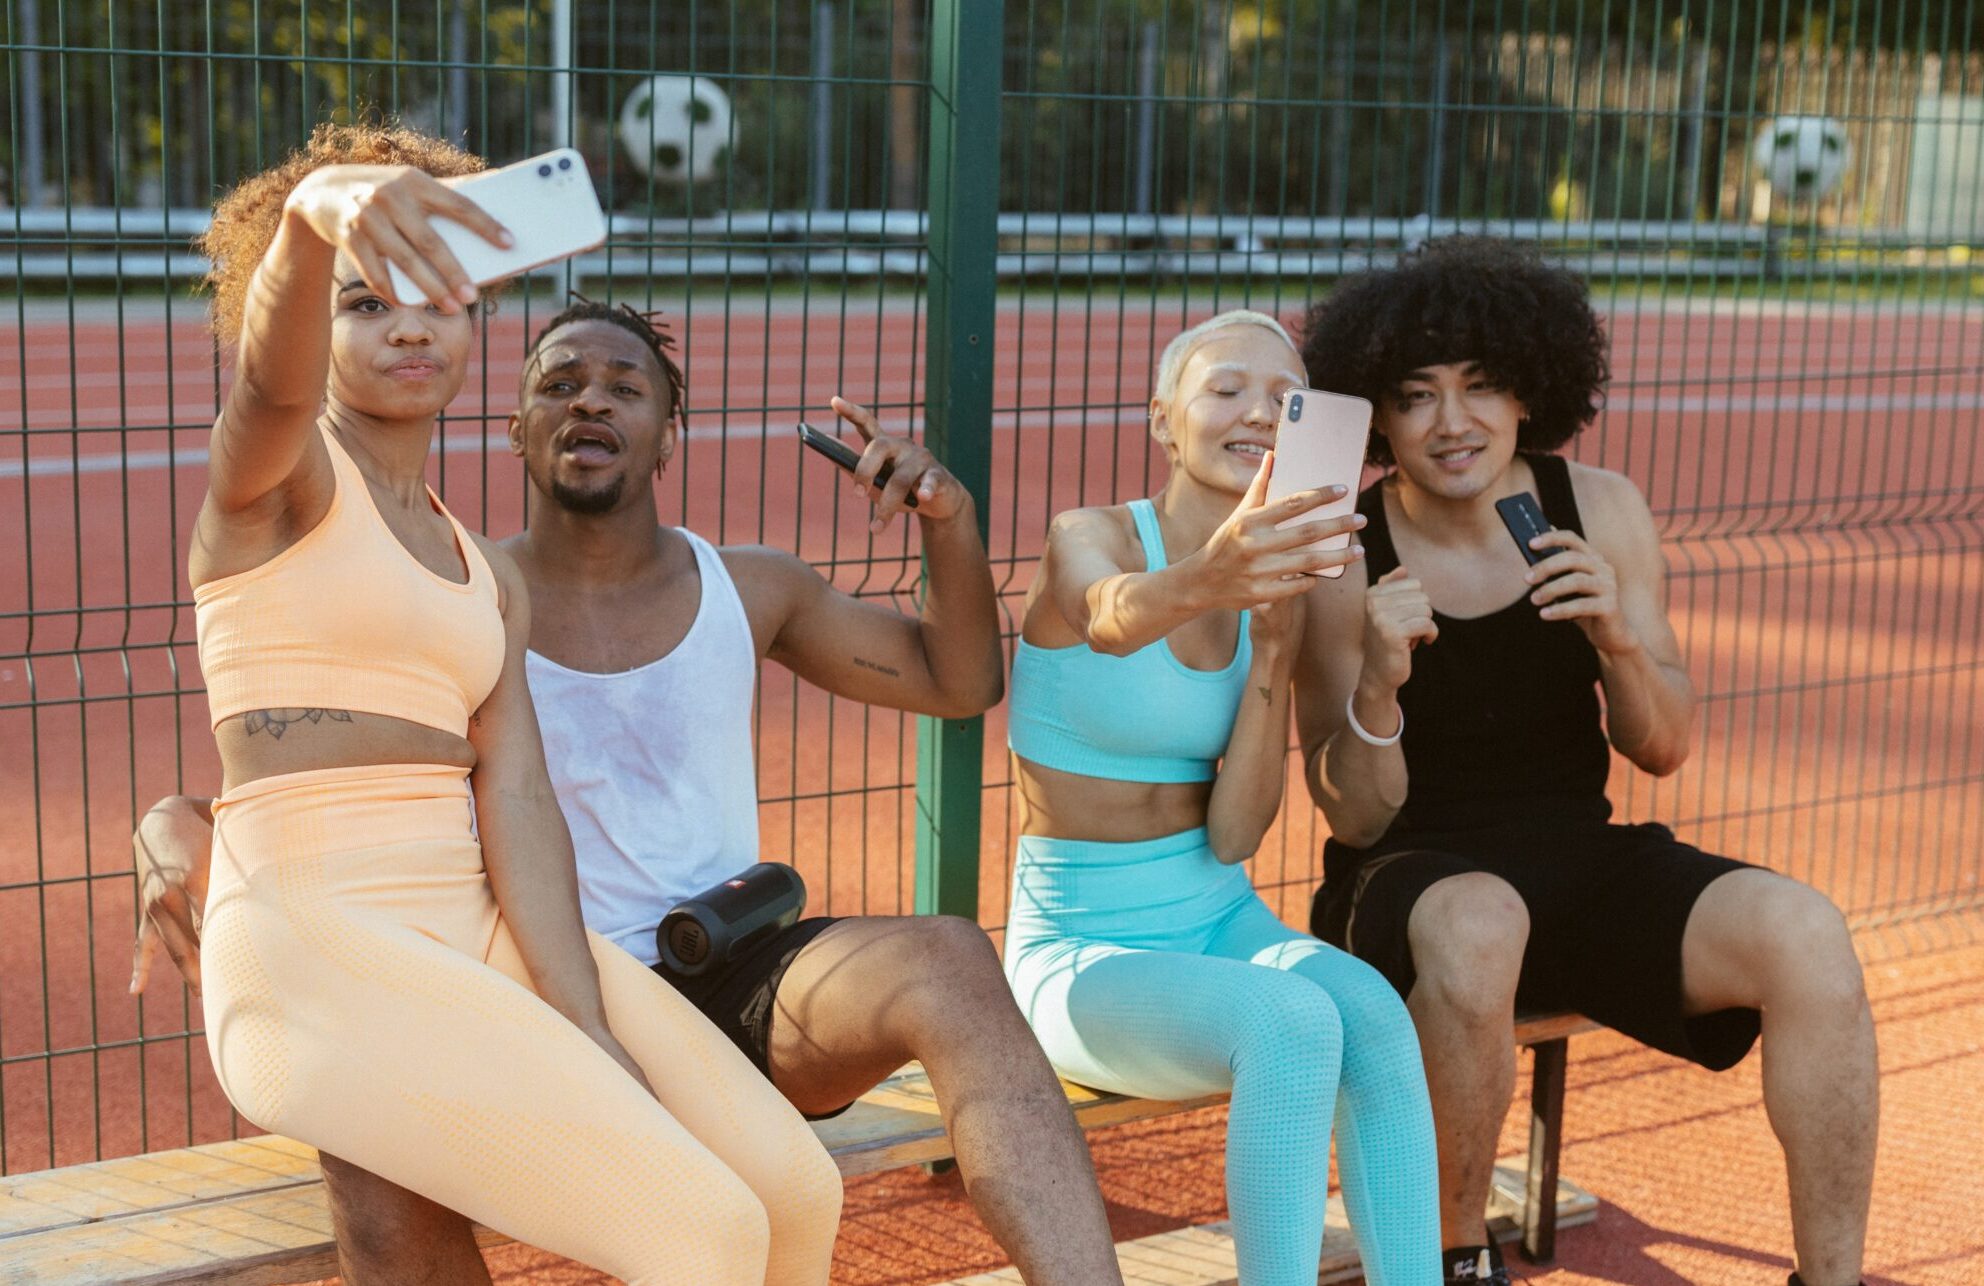 group of friends taking a selfie while sitting on an outdoor bench beside a basketball court